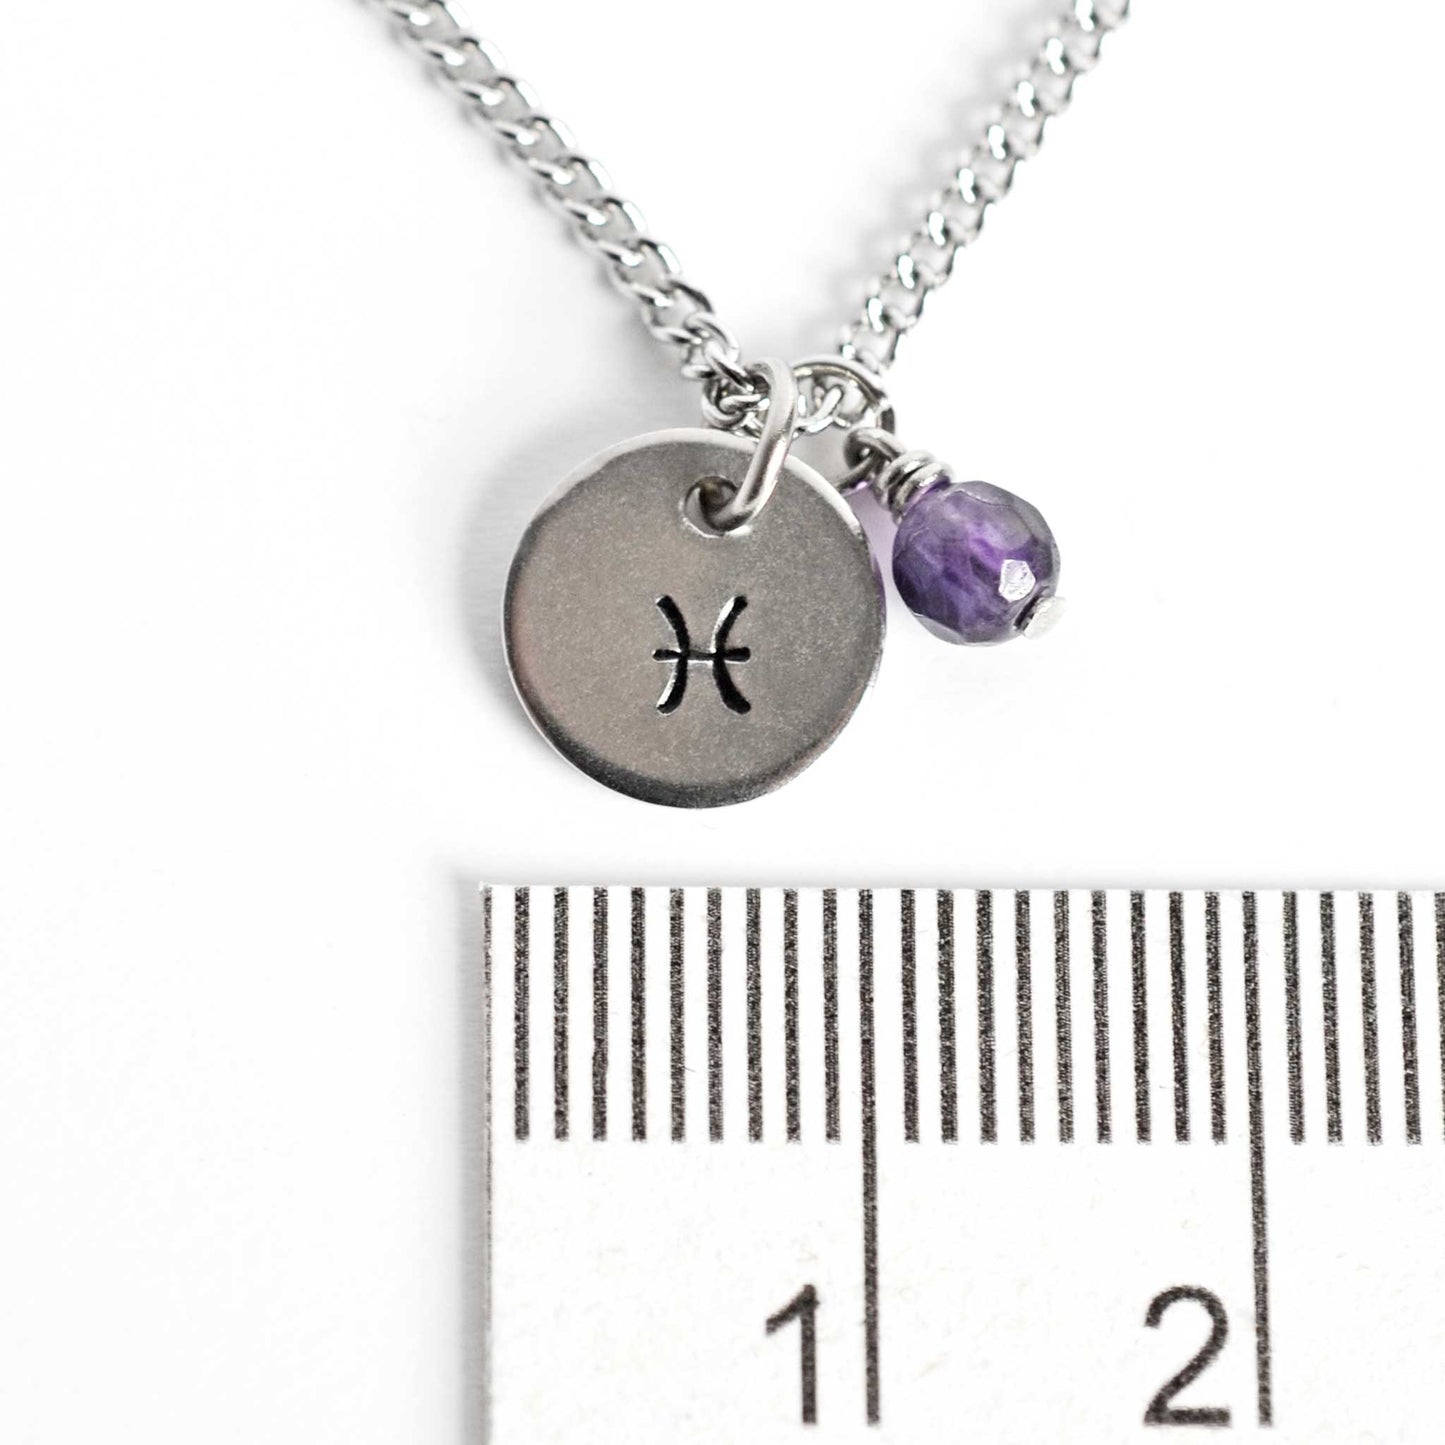 10mm round Pisces zodiac sign necklace next to ruler